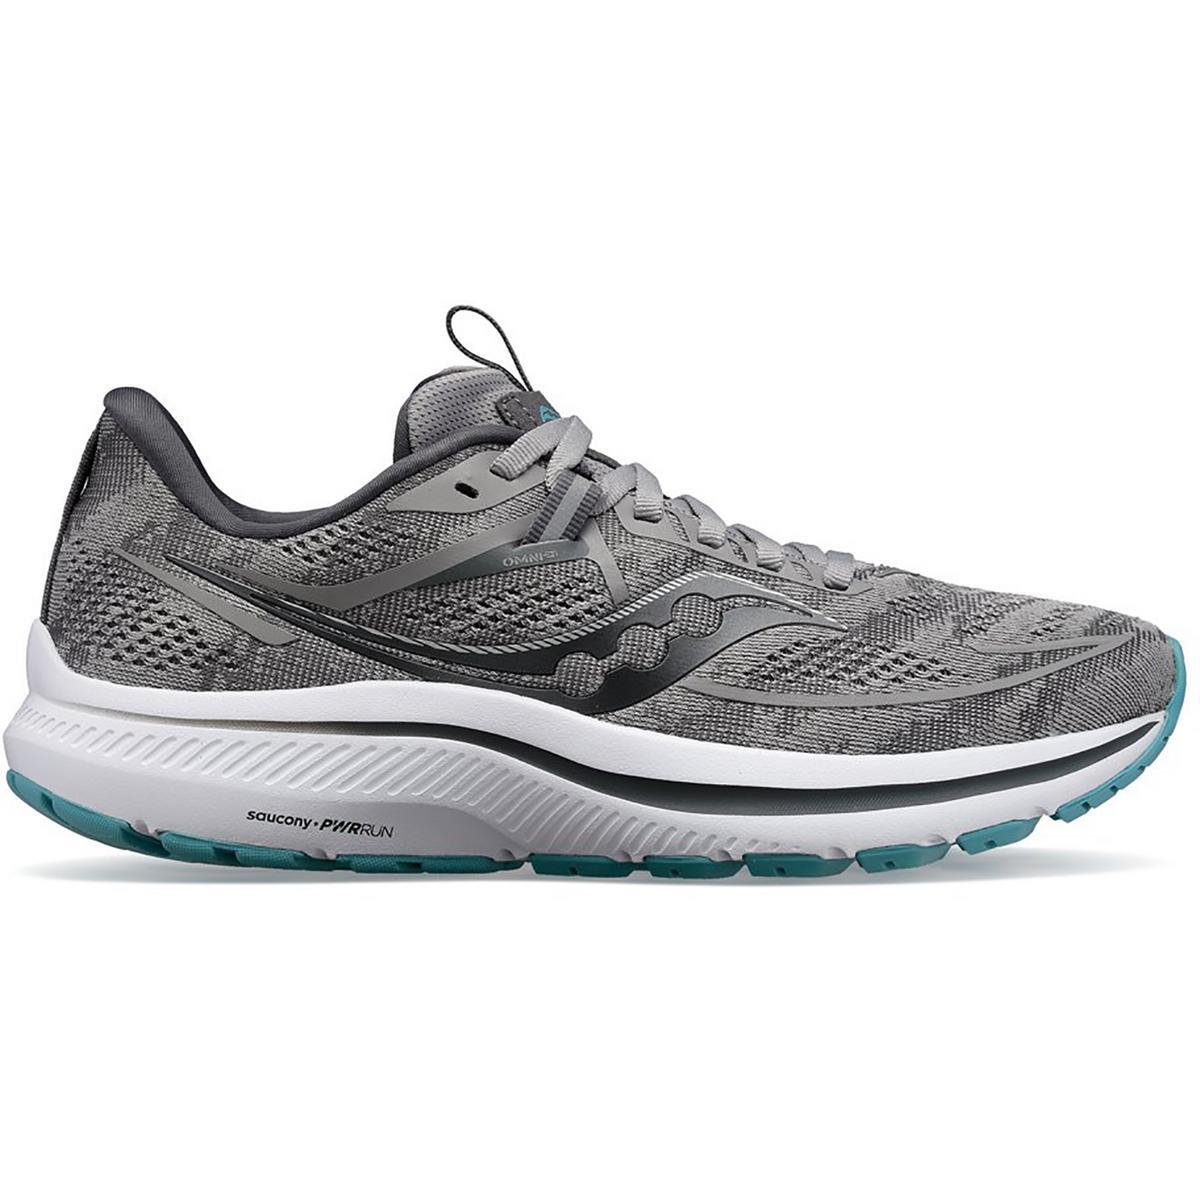 Saucony Womens Omni 21 Skyway Running Training Shoes Sneakers Bhfo 3315 Alloy/Rainfall